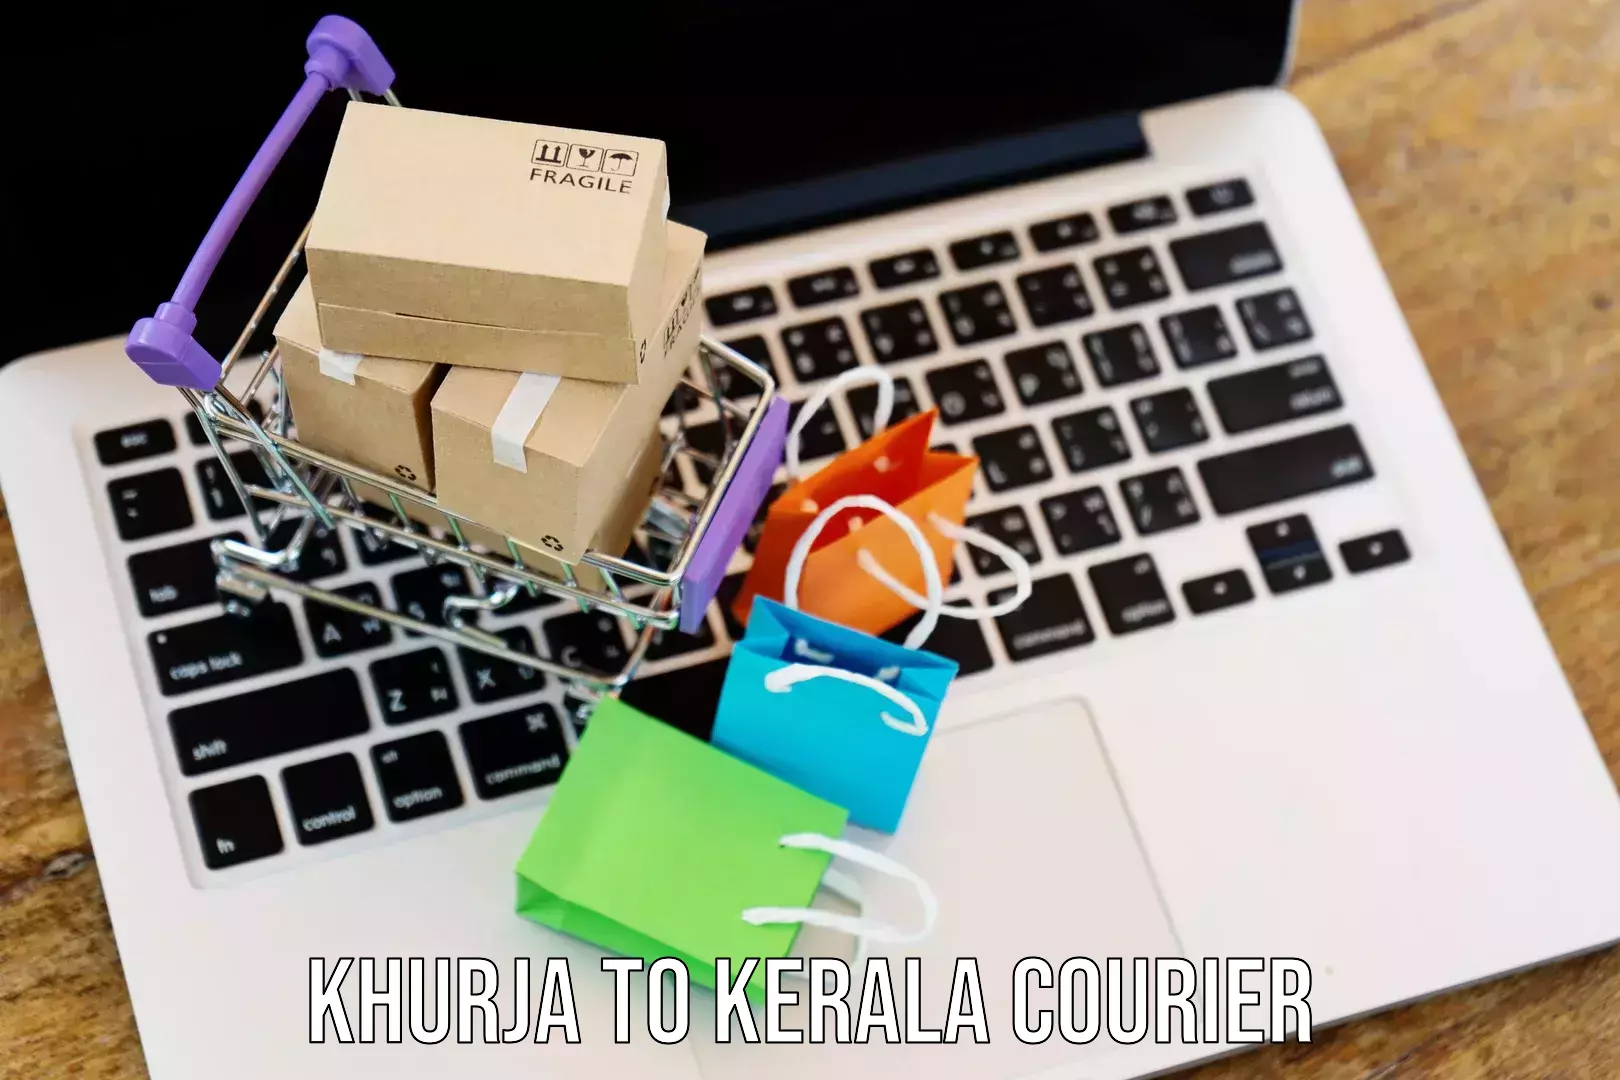 On-call courier service Khurja to Kannur